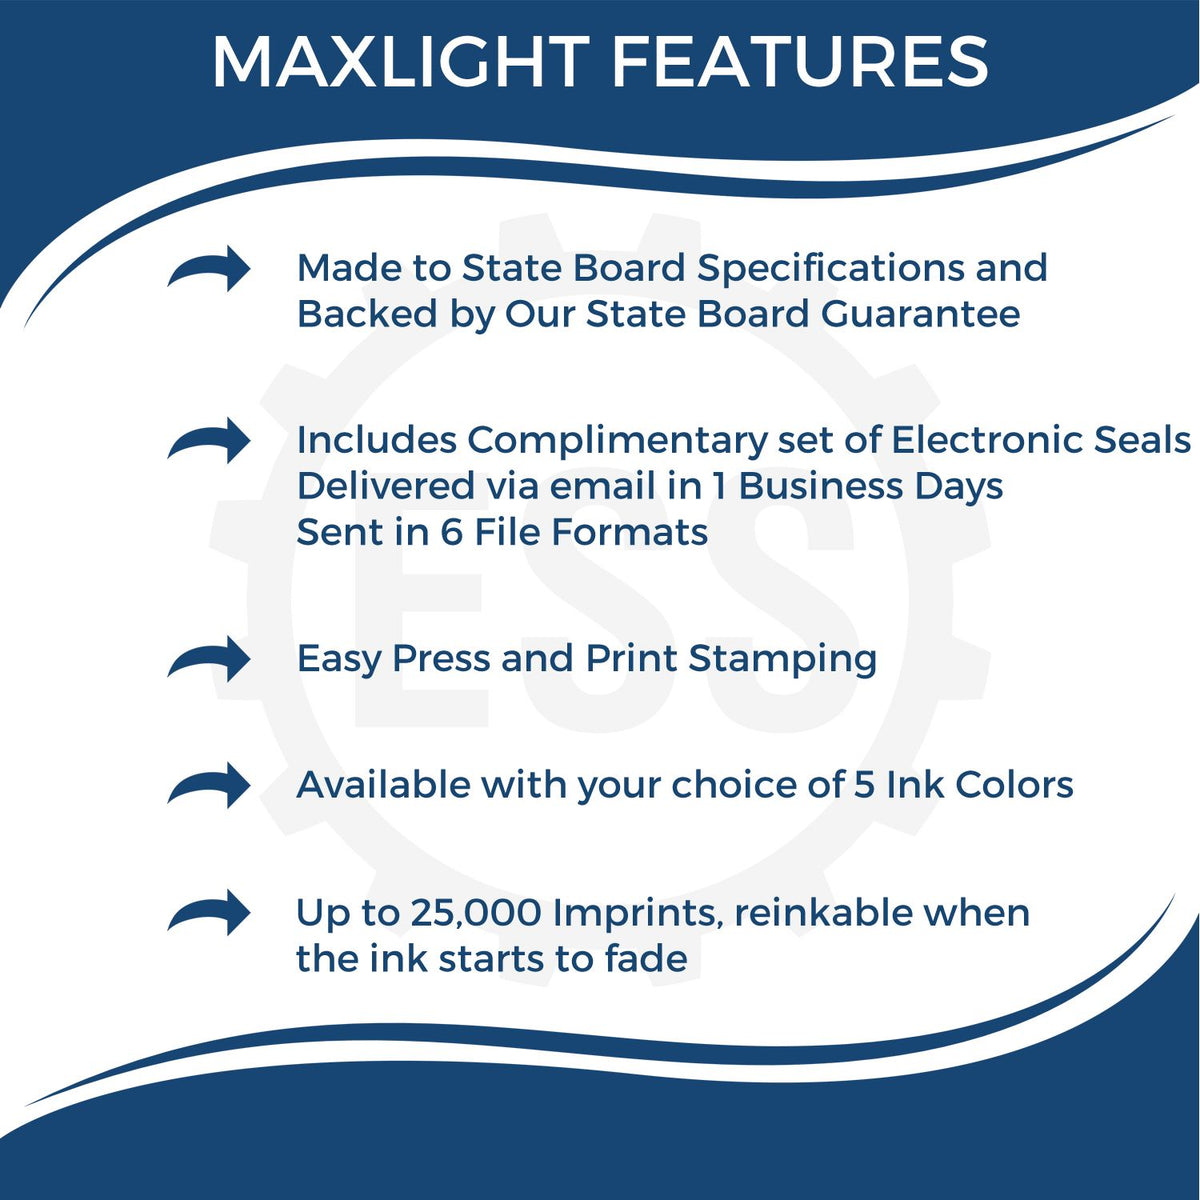 A picture of an infographic highlighting the selling points for the Premium MaxLight Pre-Inked Indiana Geology Stamp